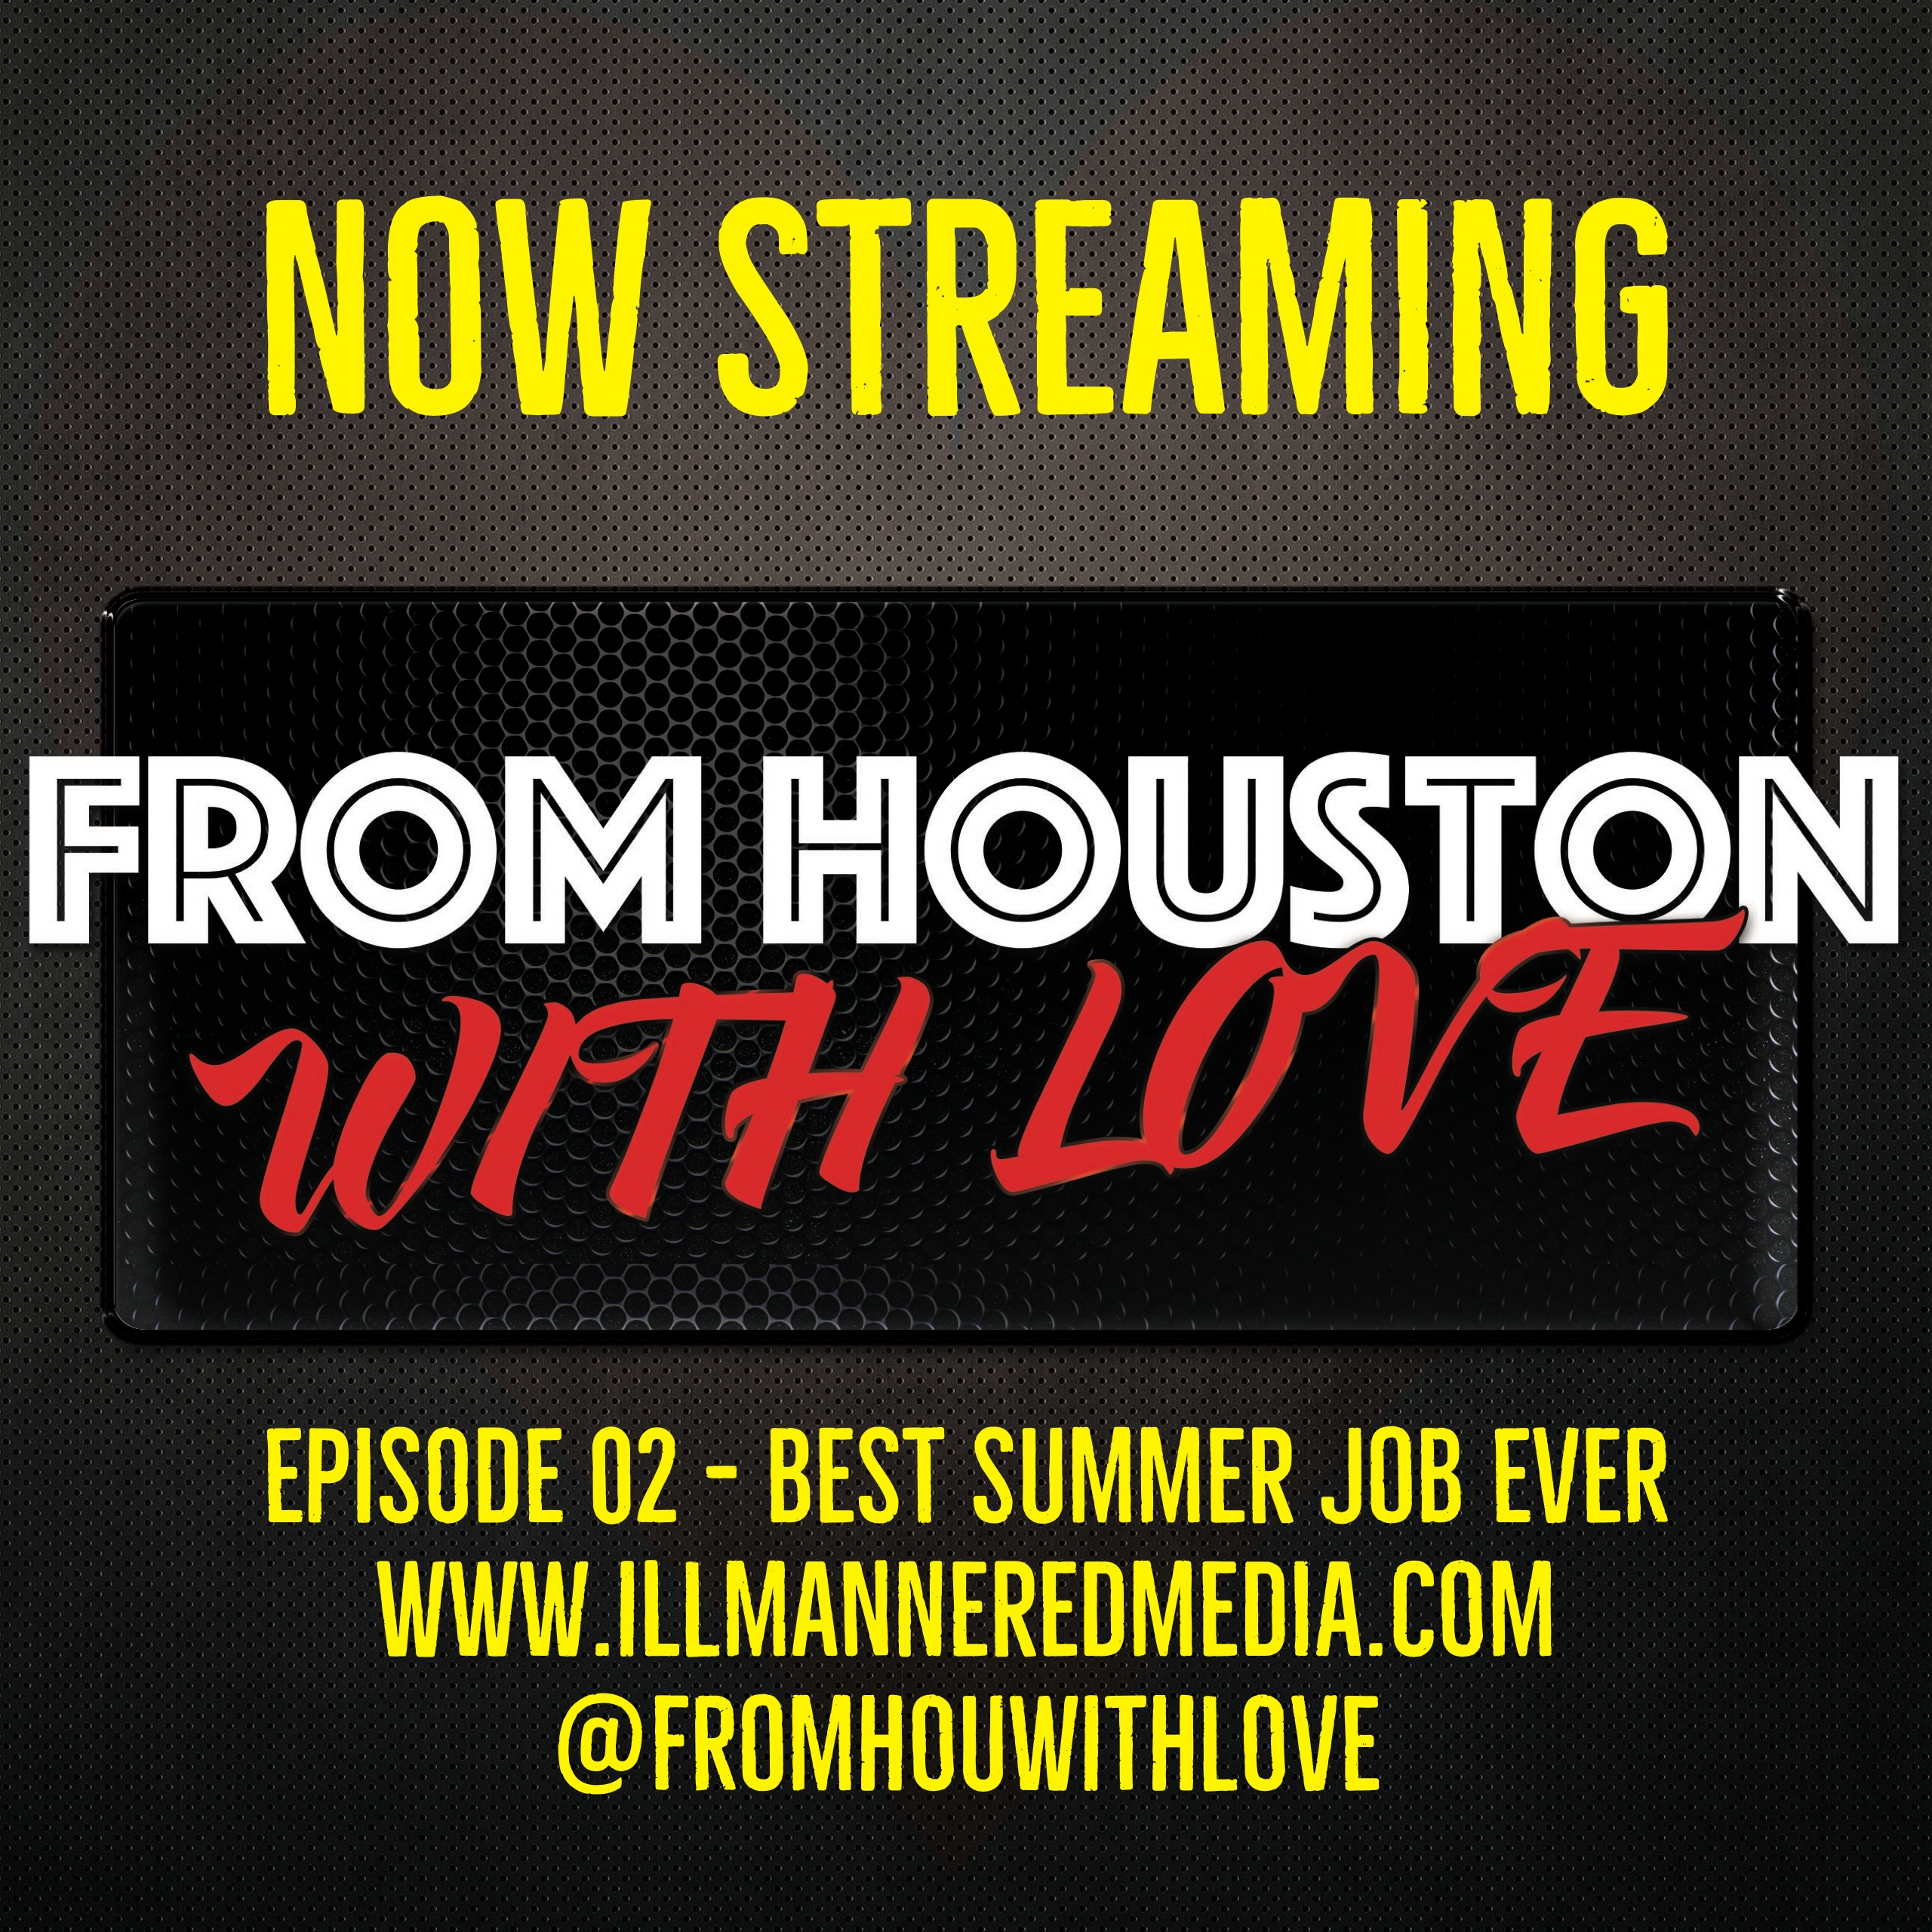 From Houston With Love: Episode 02 – “Best Summer Job Ever”